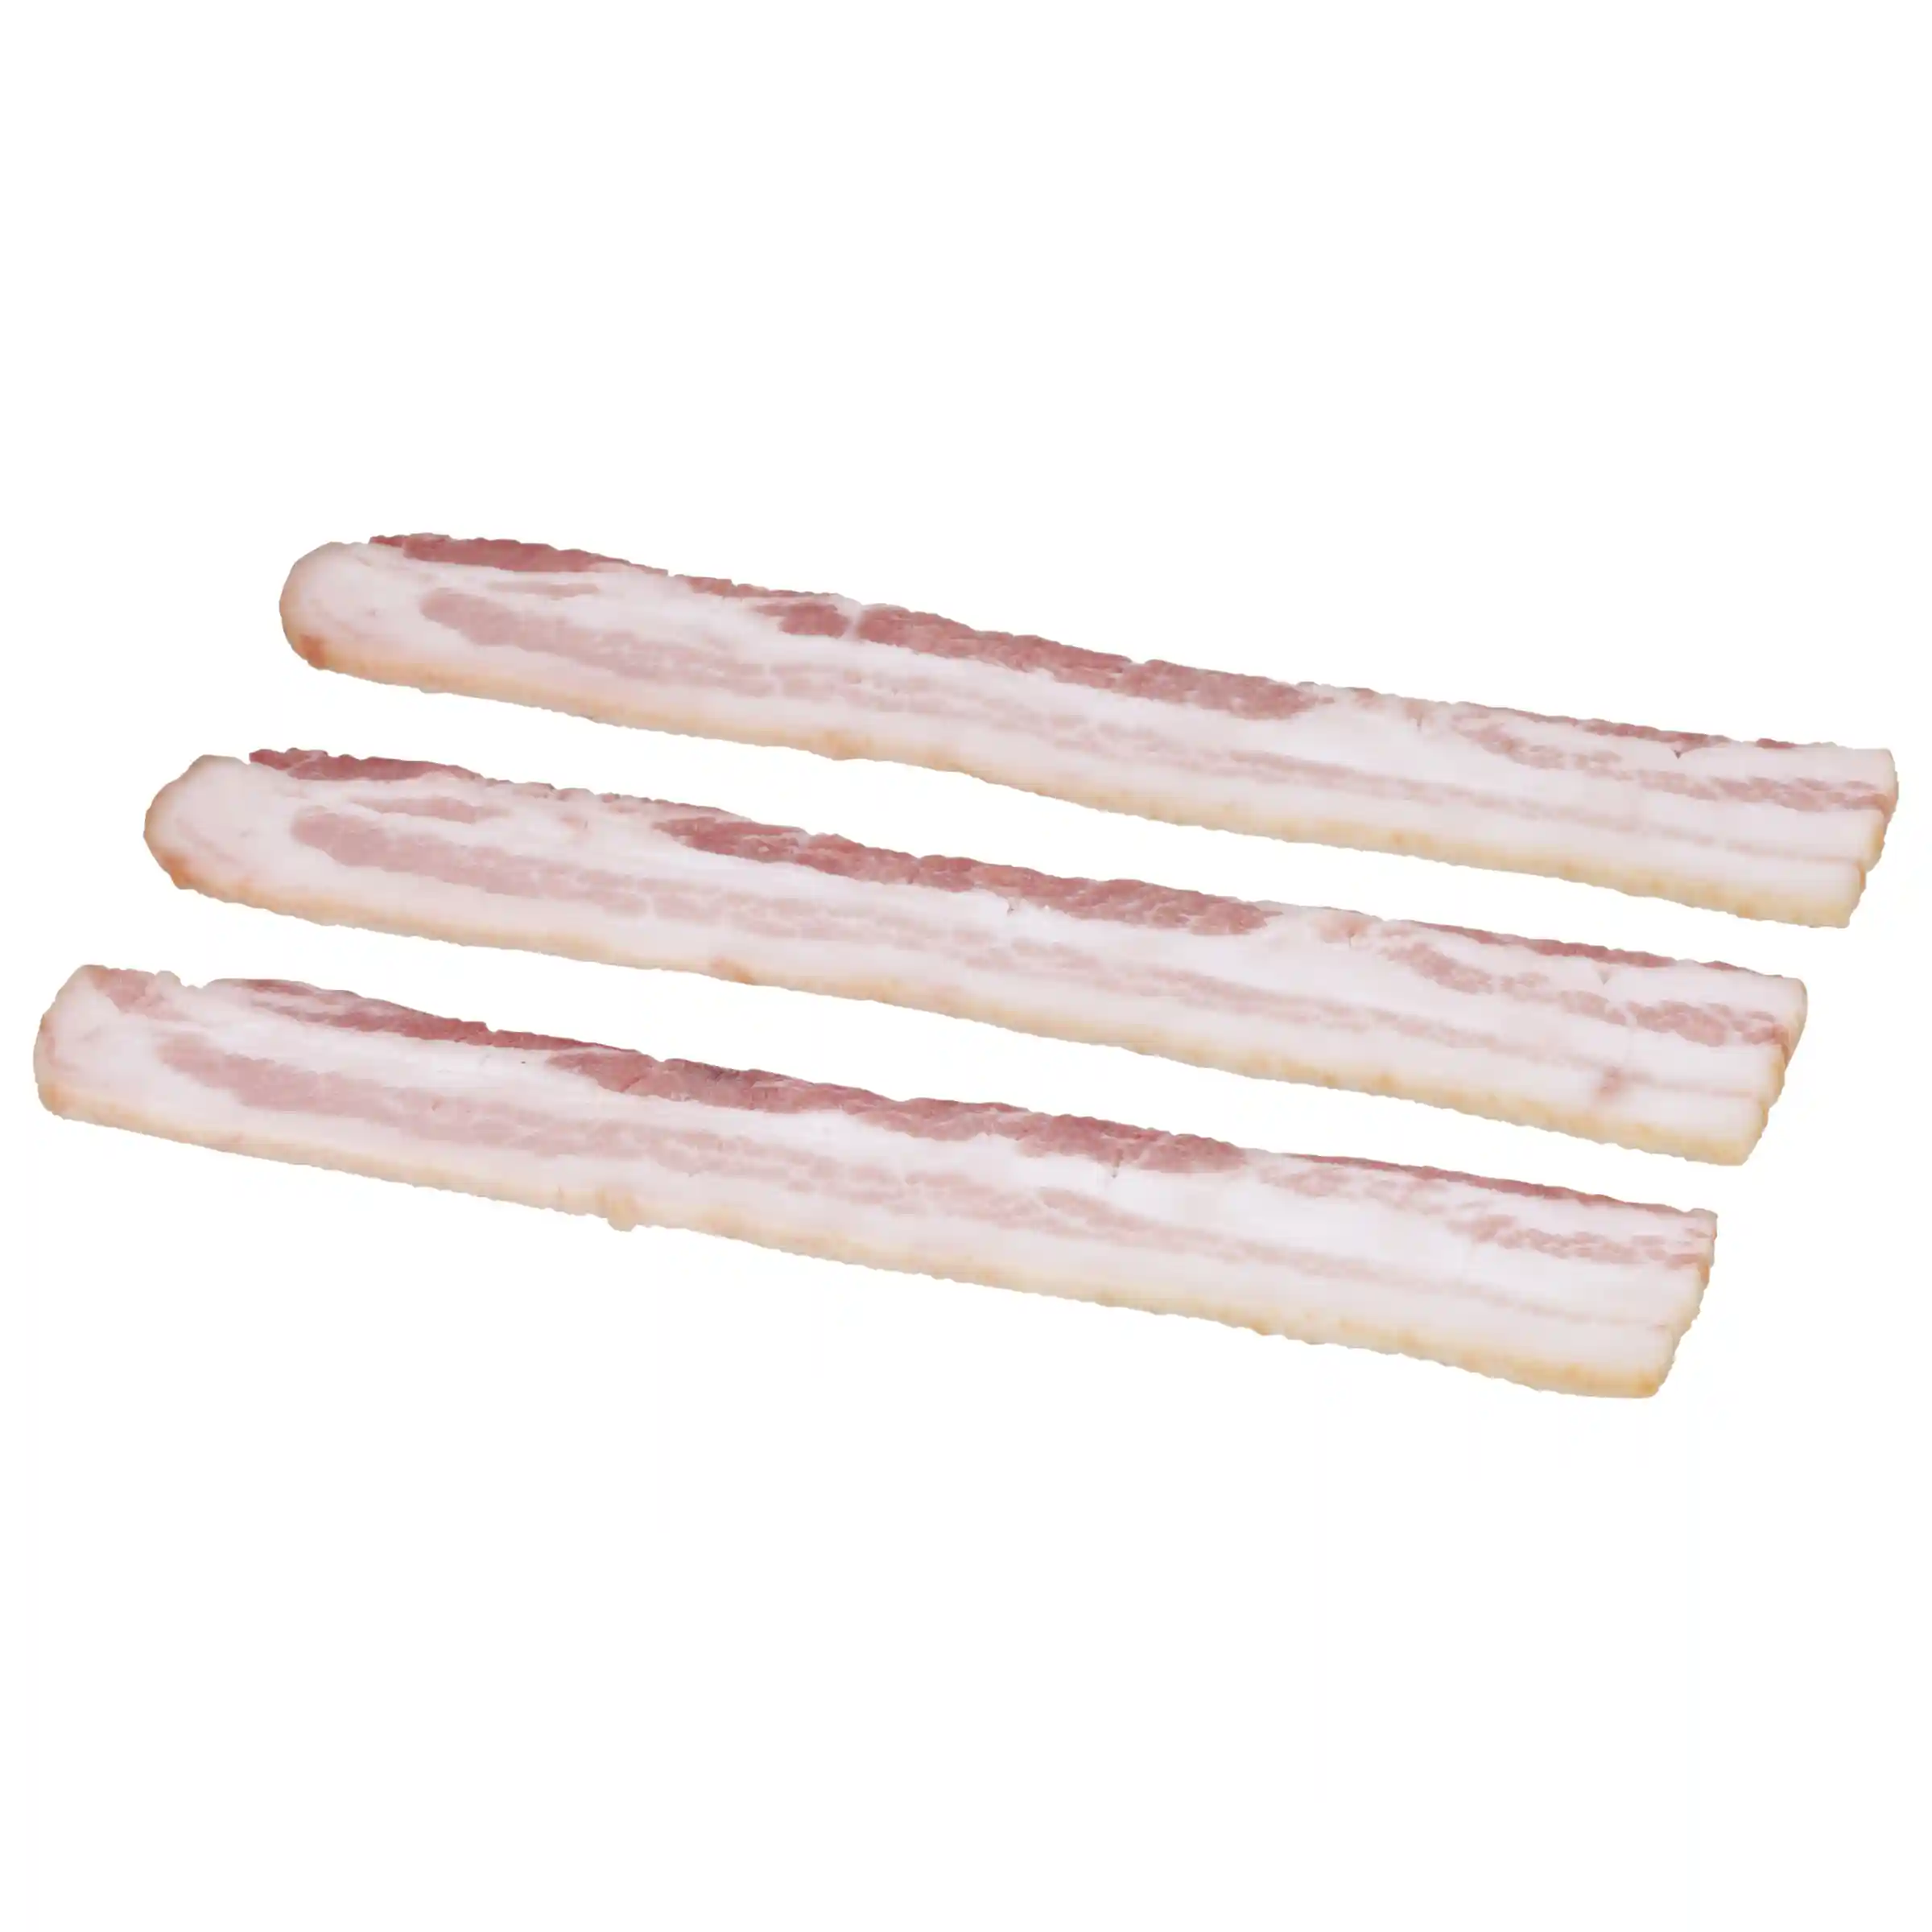 Wright® Brand Naturally Hickory Smoked Thick Sliced Bacon, Bulk, 30 Lbs, 5 Slices/Inch, Frozen_image_11